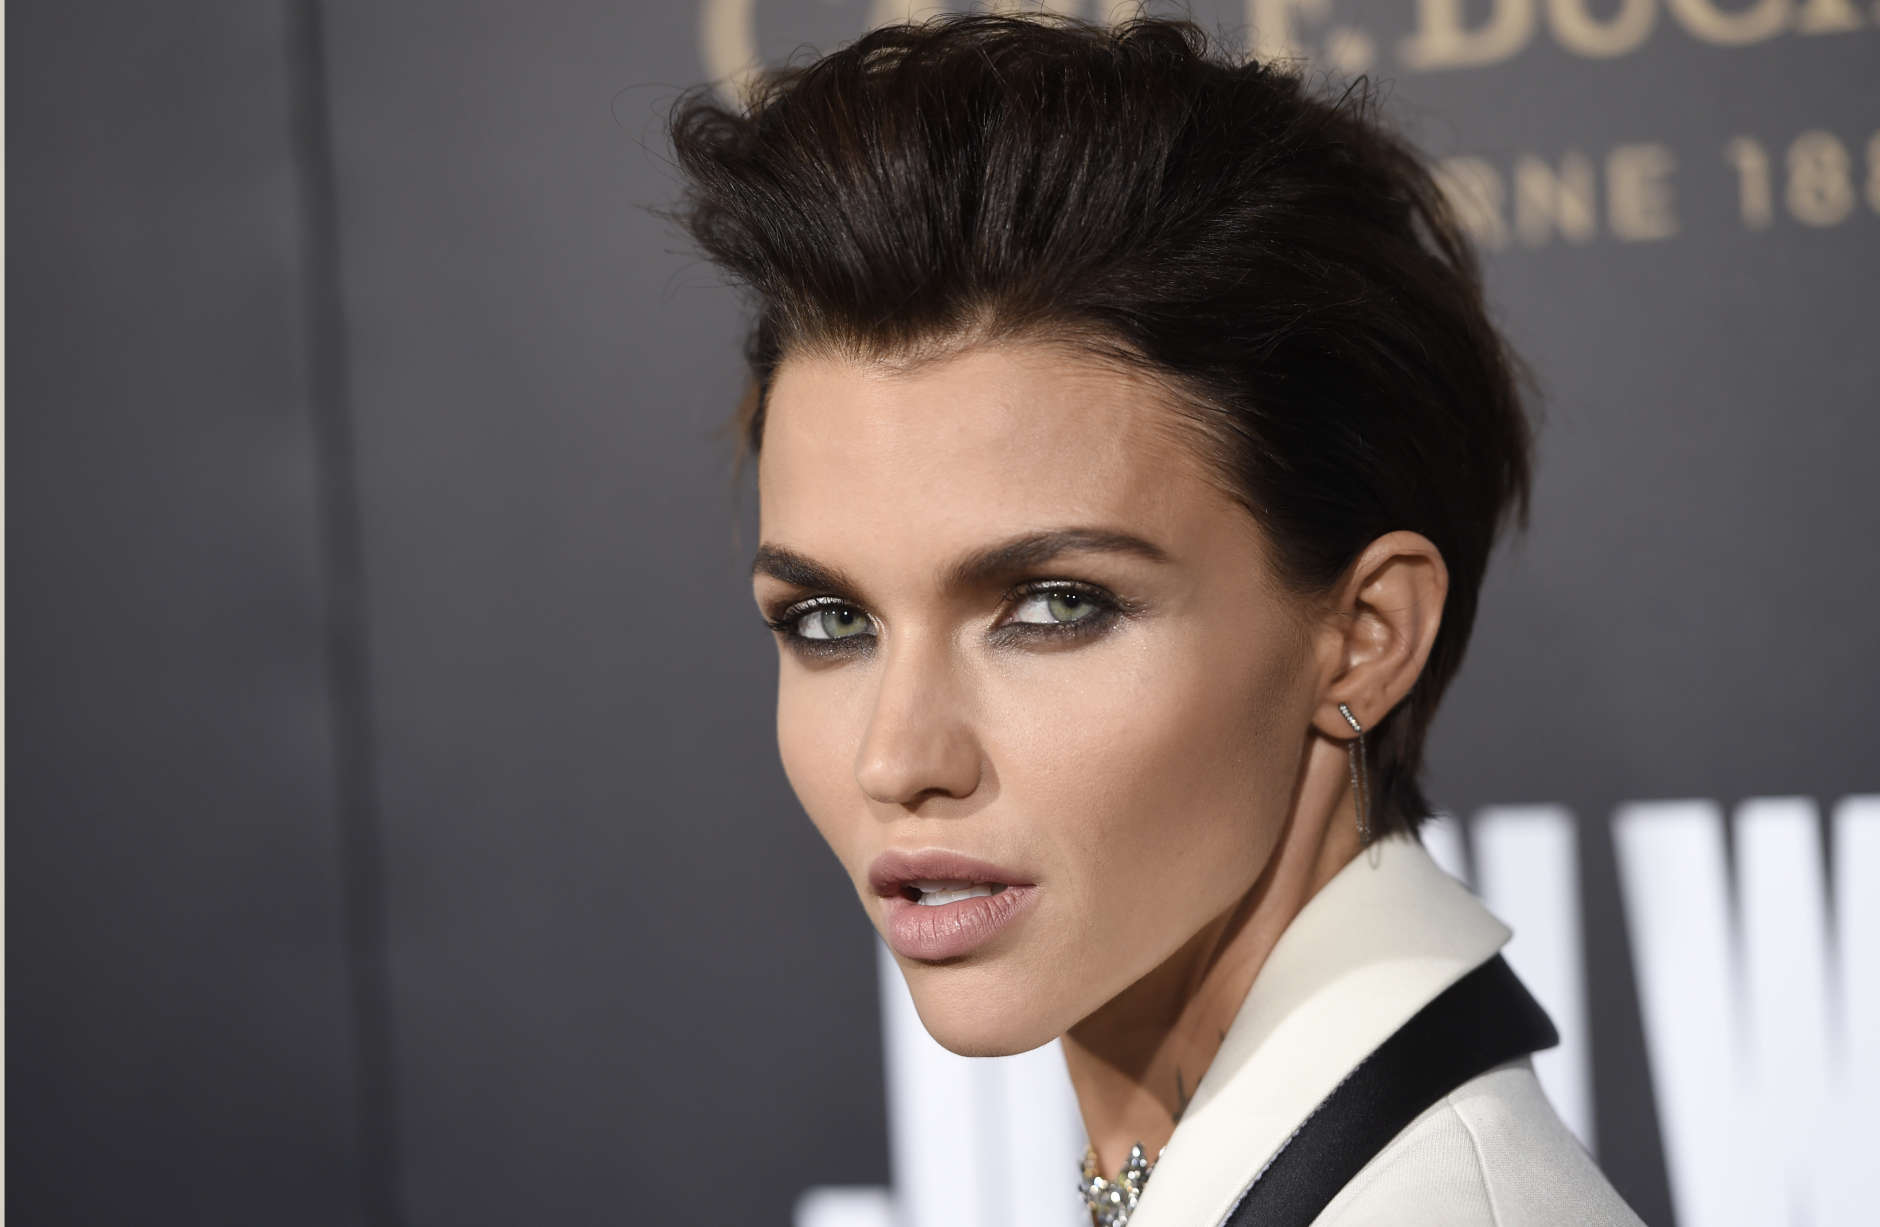 Actress Ruby Rose of "Orange is the New Black" is on March 20. (Photo by Chris Pizzello/Invision/AP)